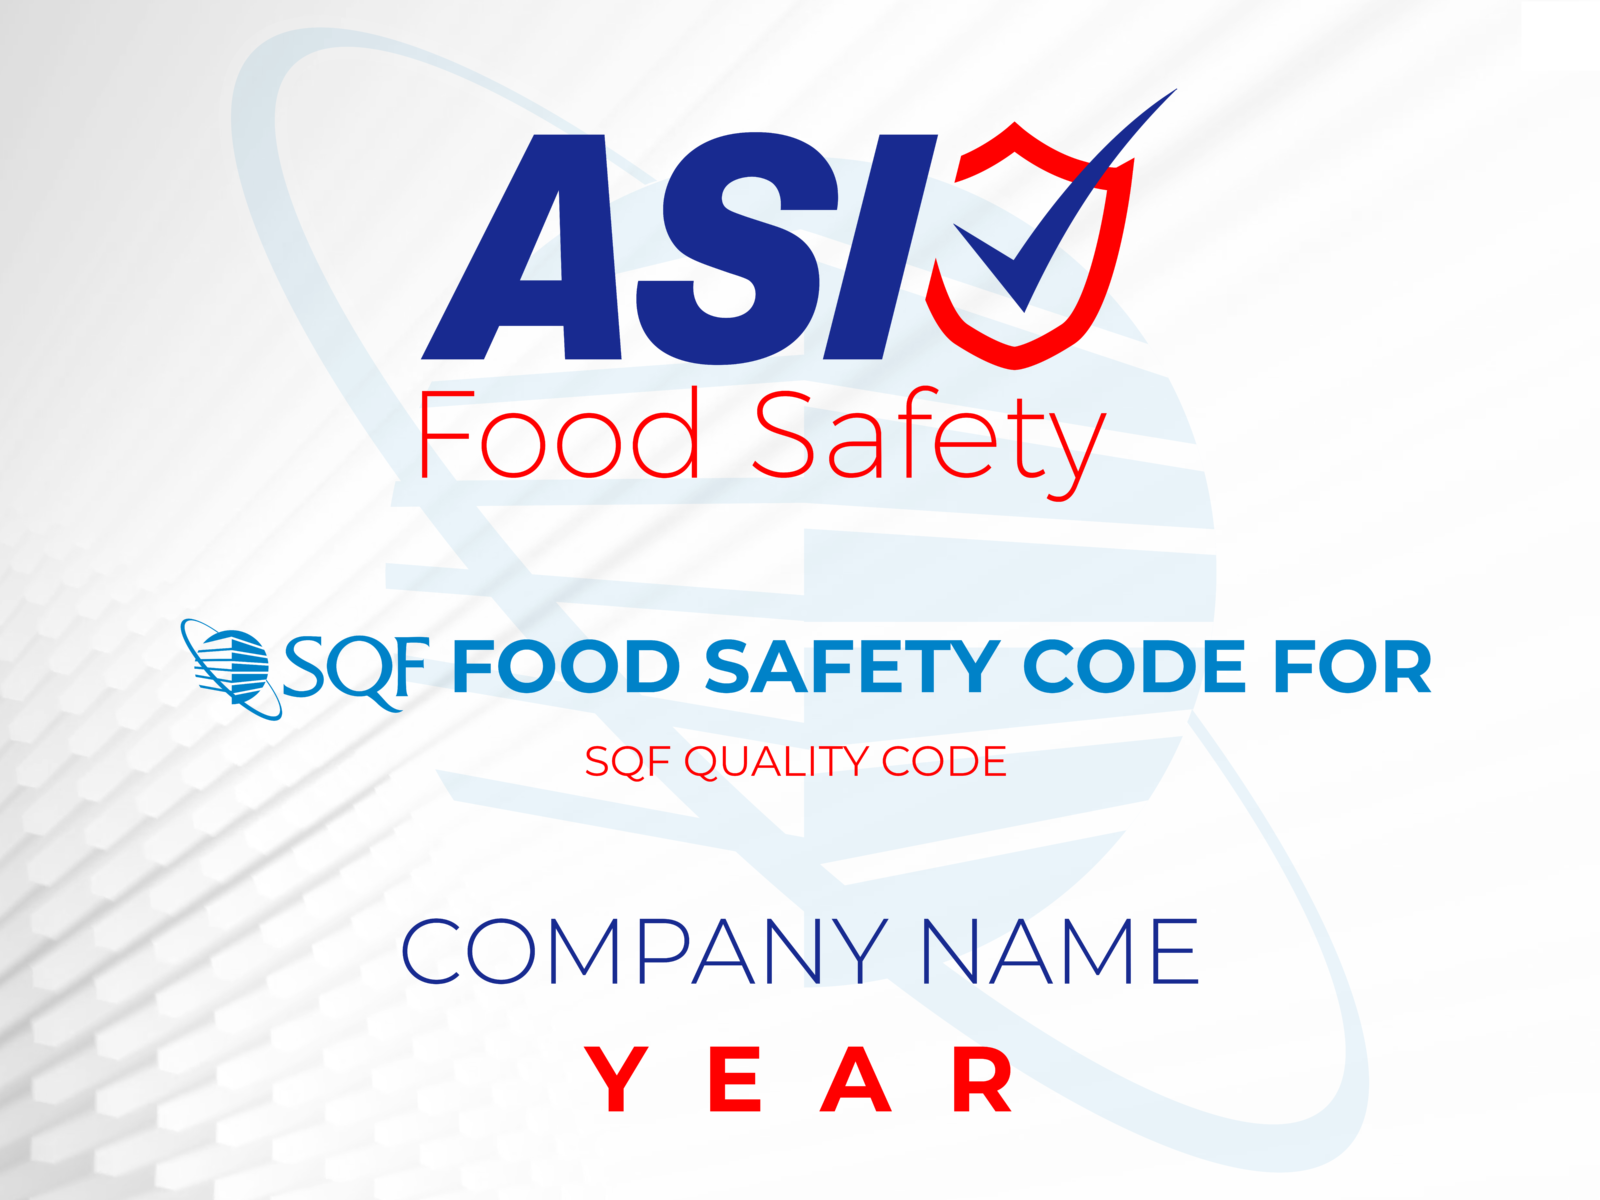 RizePoint Food Safety- ASI